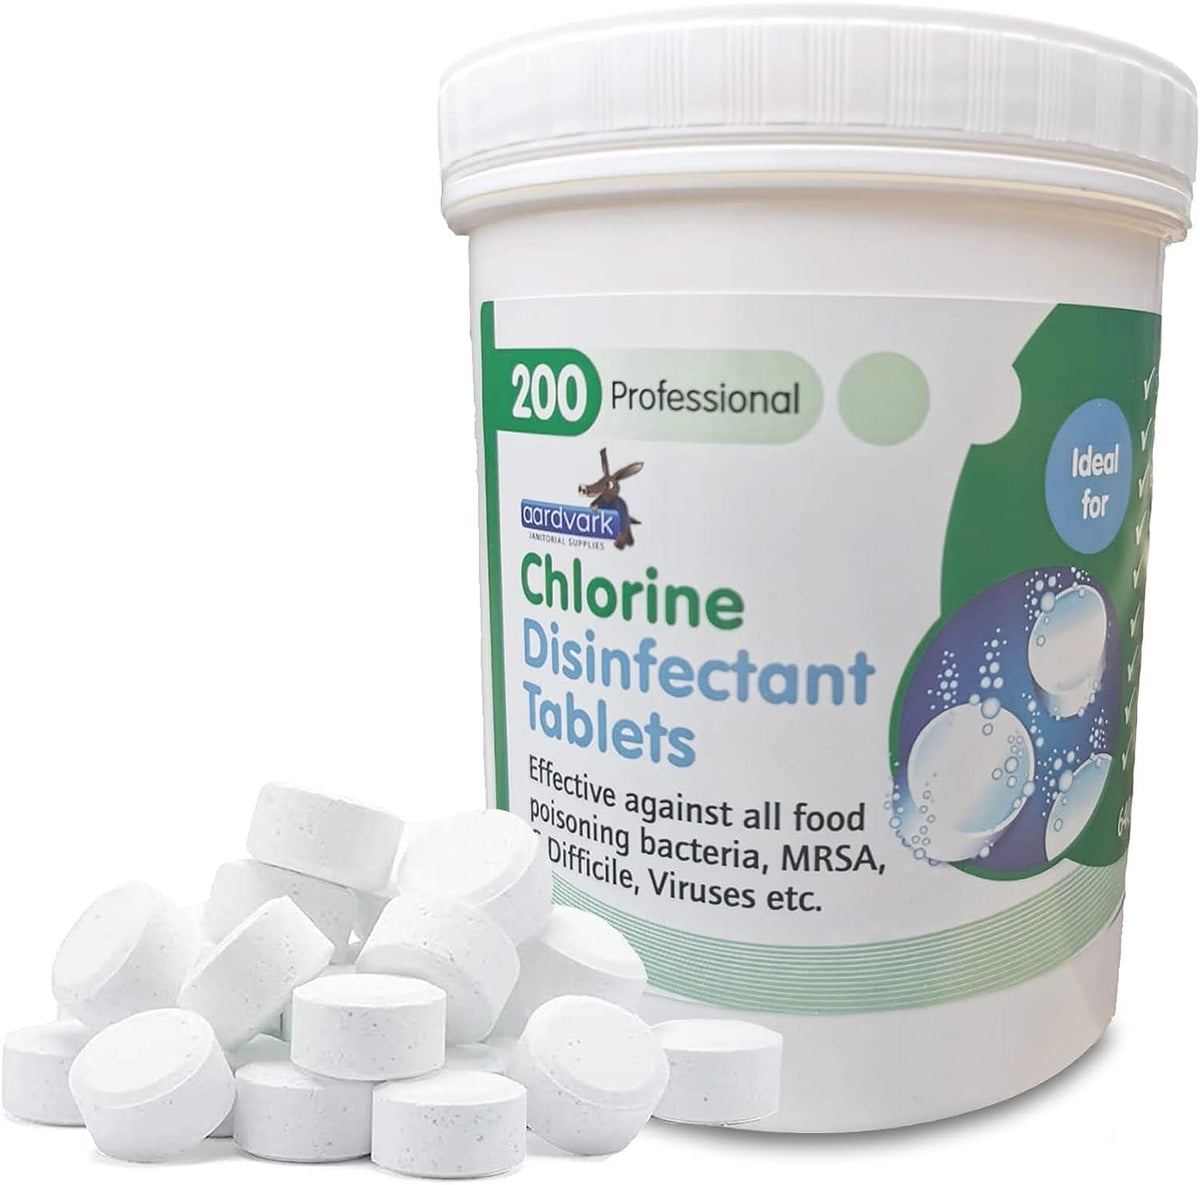 200 Professional Bleach Chlorine Disinfectant Tablets